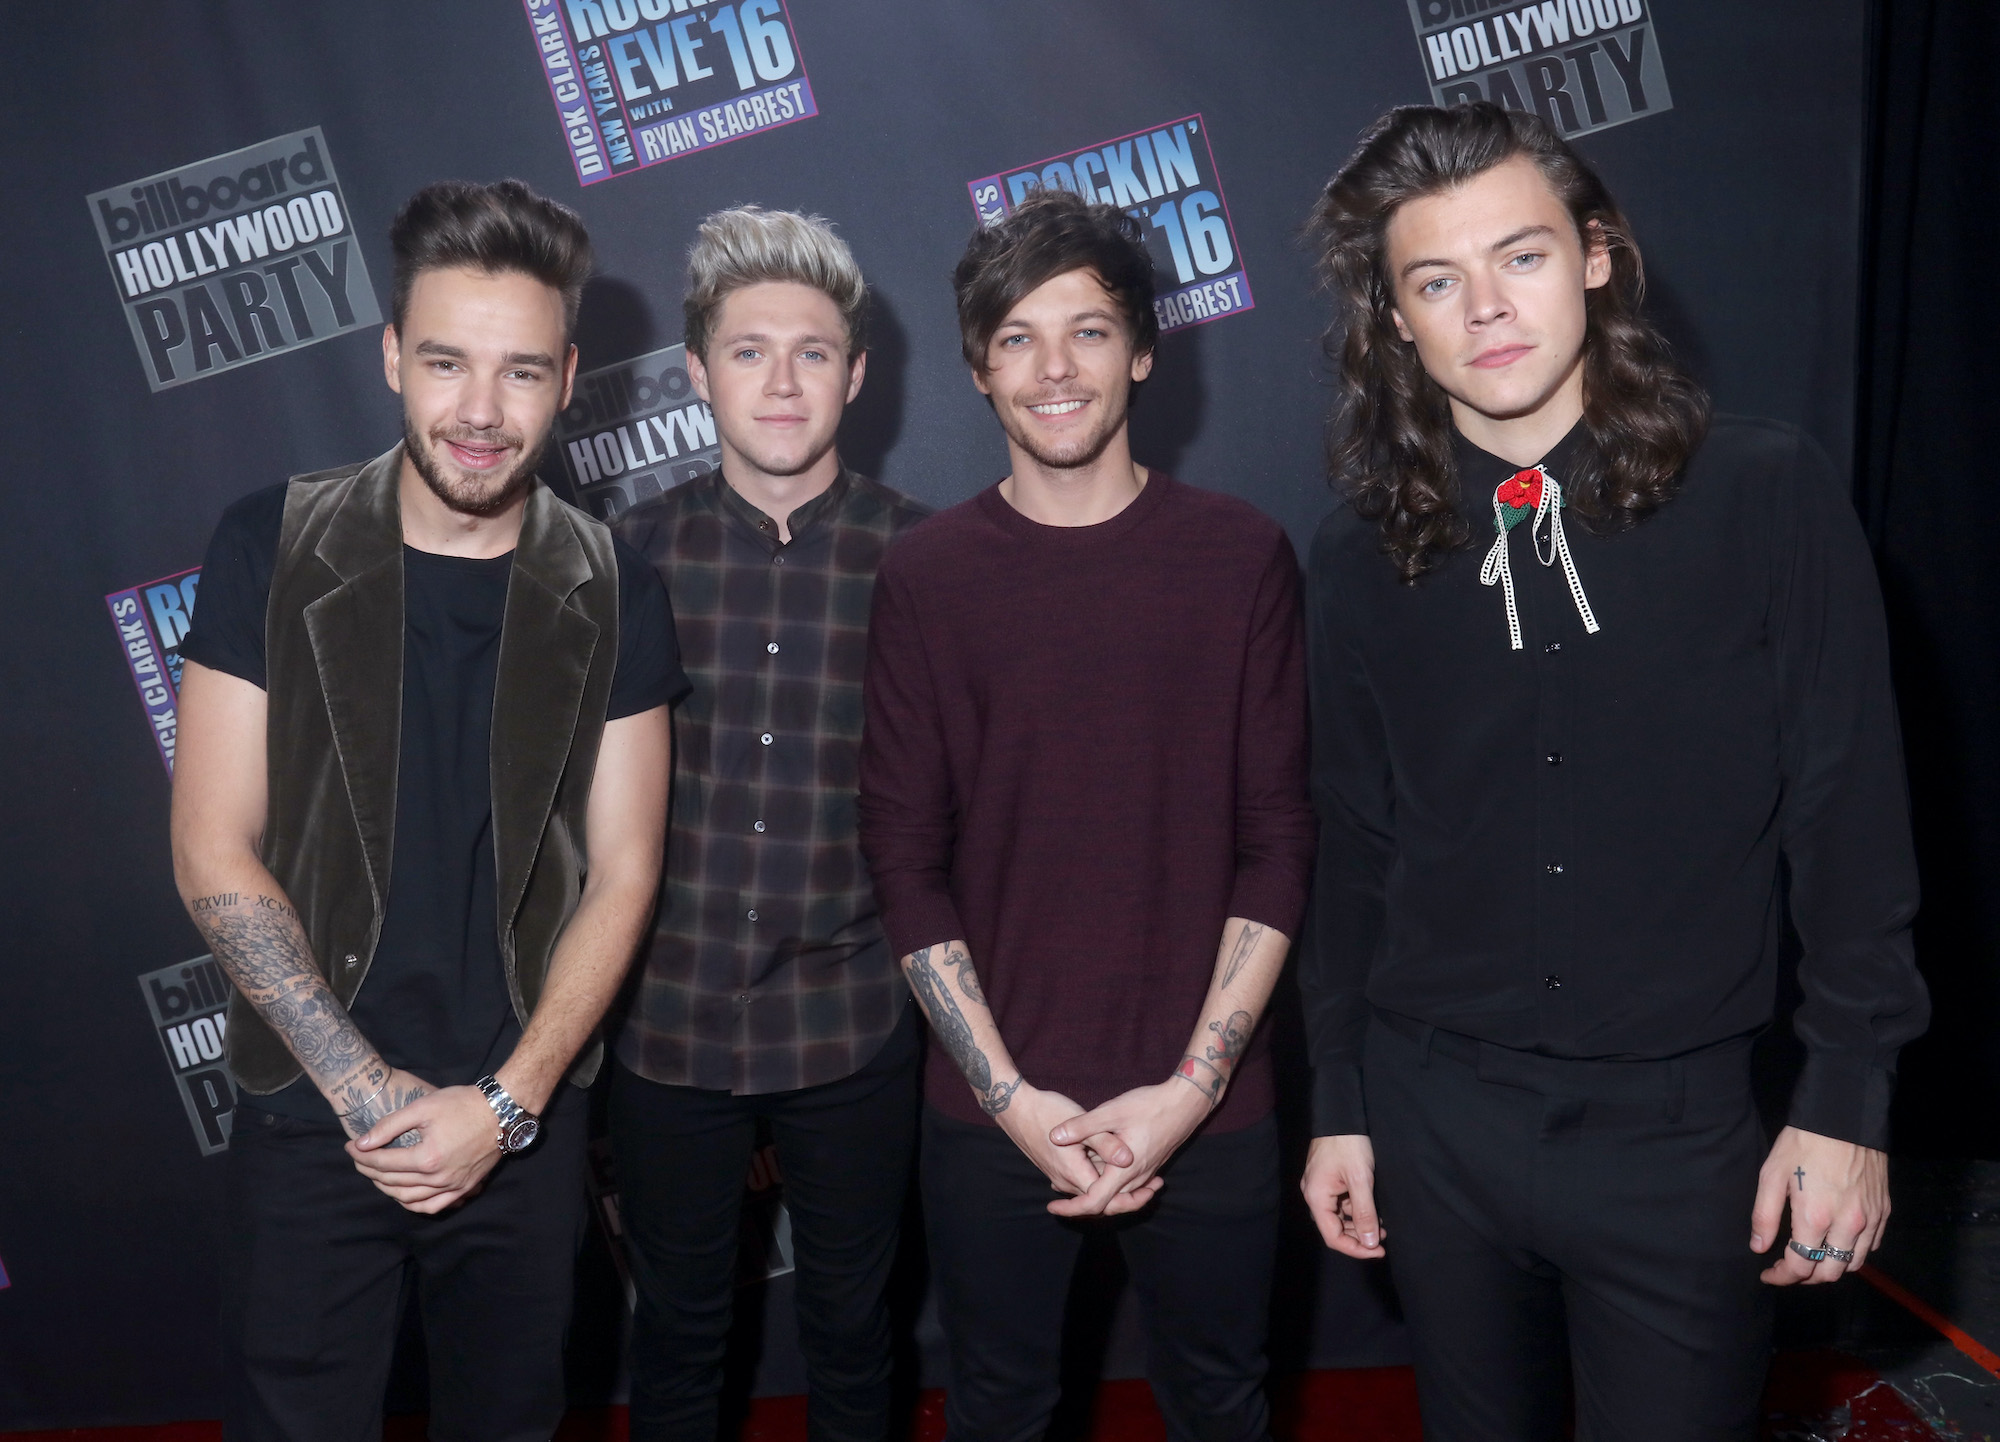 (L-R) Liam Payne, Niall Horan, Louis Tomlinson and Harry Styles smiling